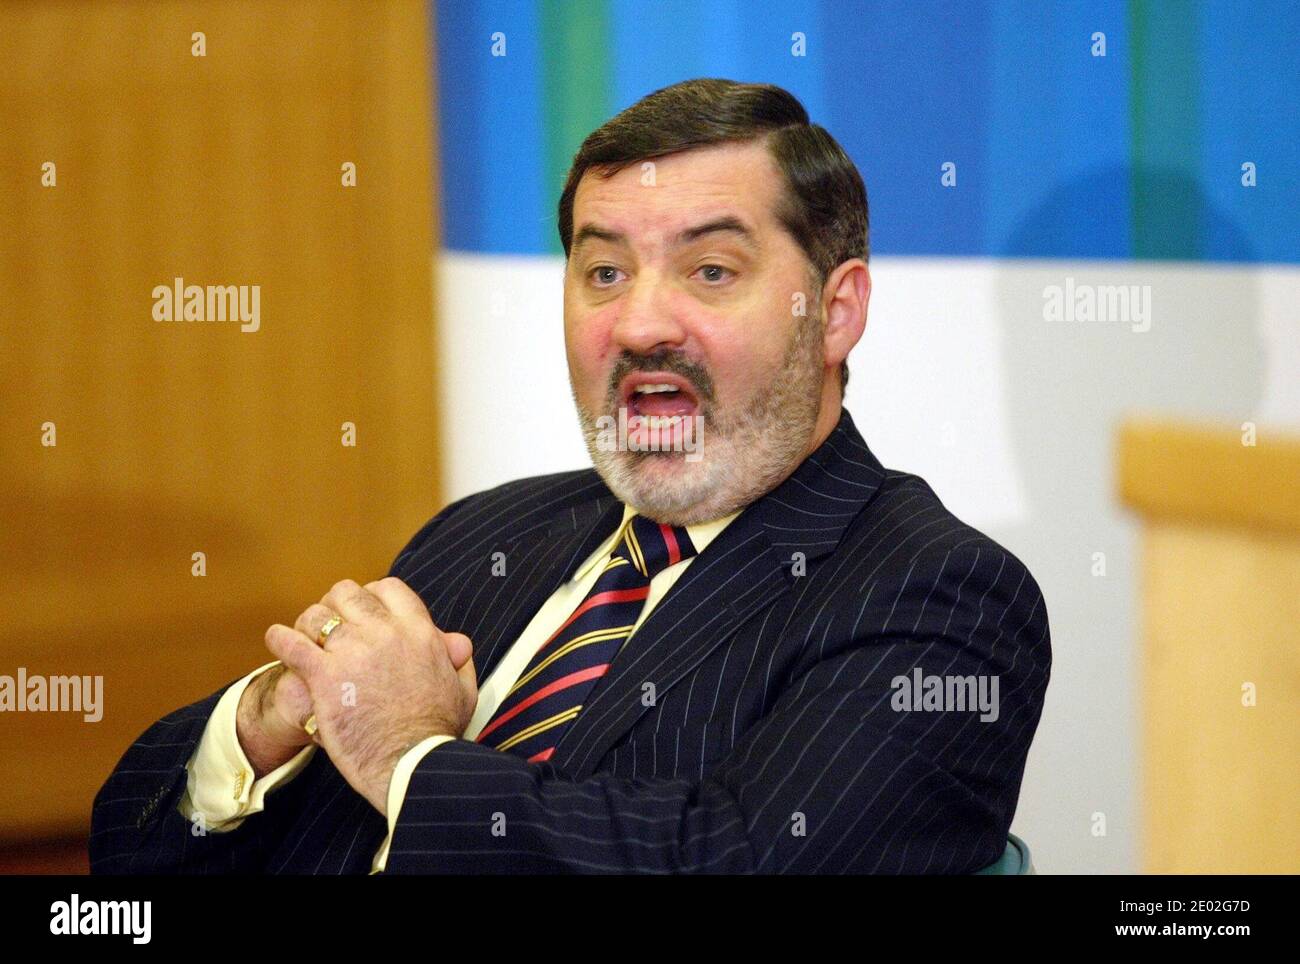 File photo dated 10/02/05 of John Alderdice, who led the Alliance Party from 1987 through to the negotiation of the 1998 Good Friday Agreement. He has said that real dialogue was the last thing many republicans wanted. Stock Photo